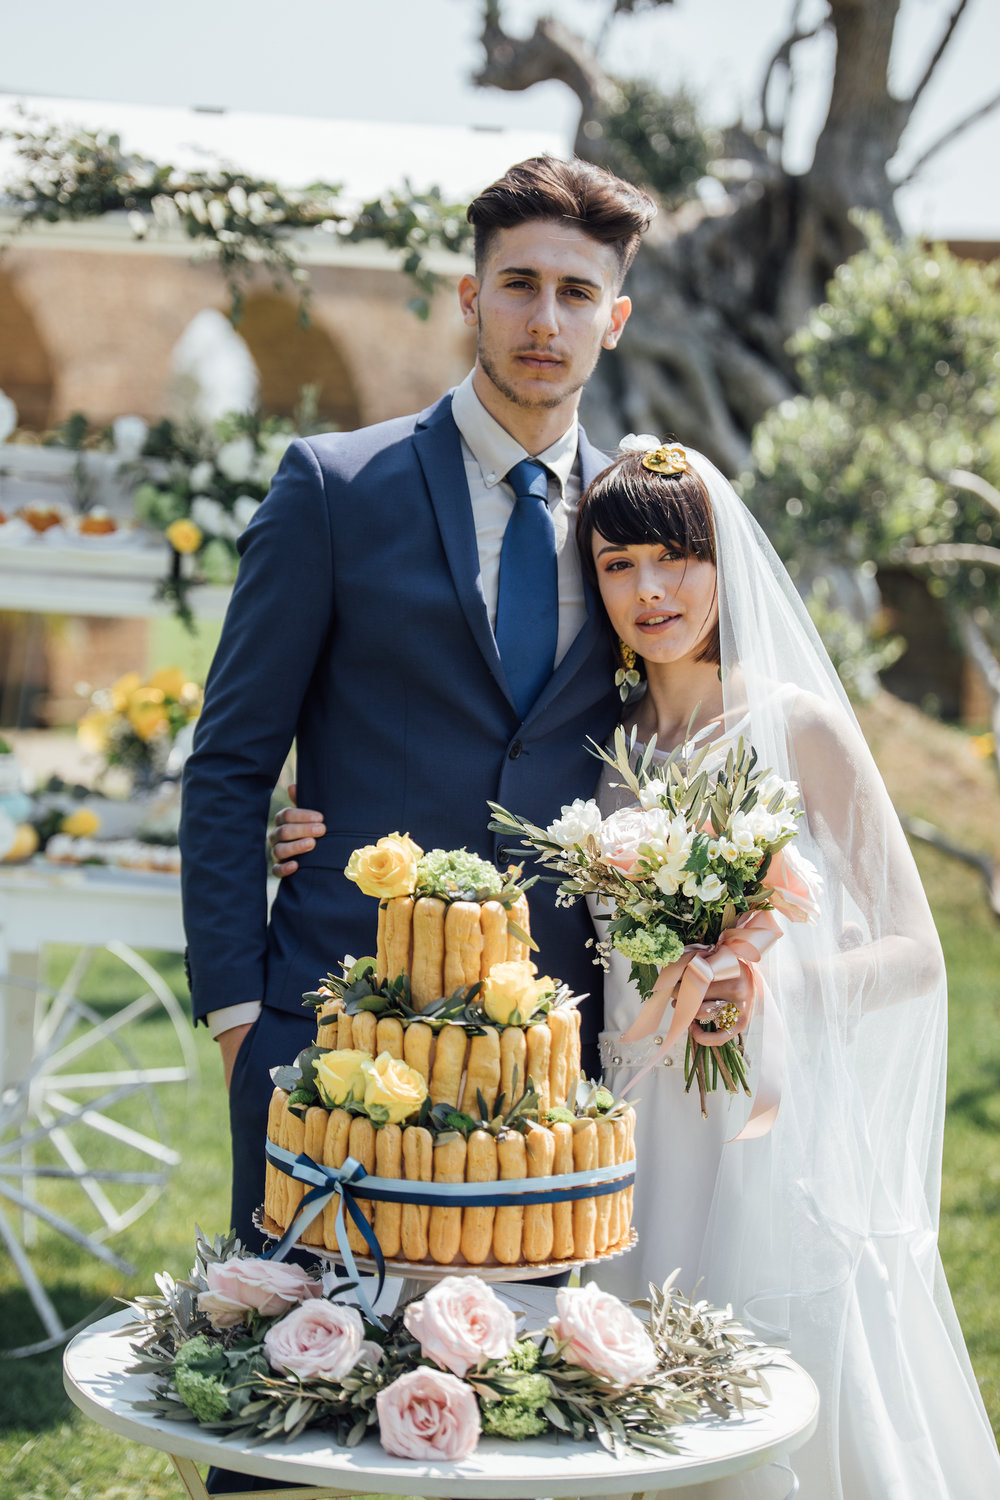  Pretty Bridal Portrait from a Lemon Yellow Garden Wedding Styled Shoot in Rome Italy - by Jess Palatucci Photography - as seen on www.BrendasWeddingBlog.com 